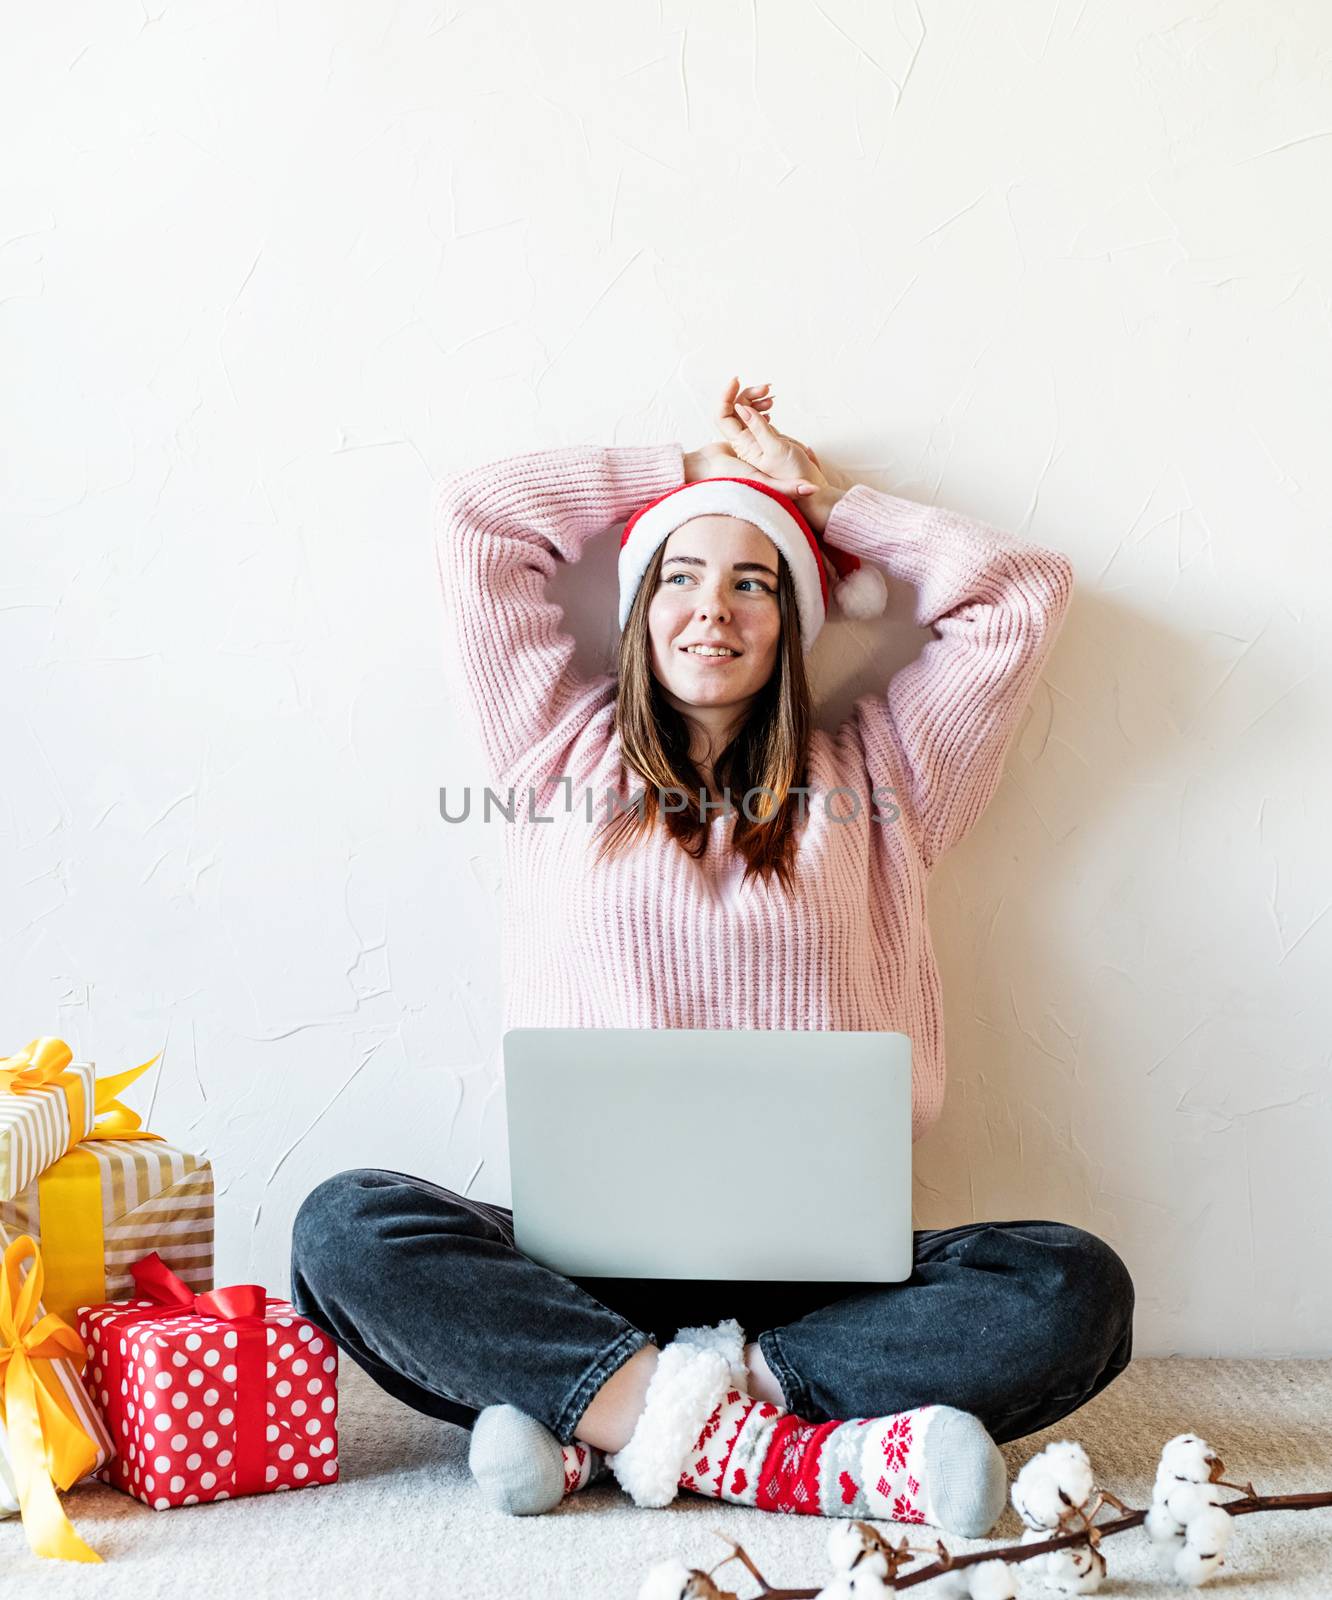 Christmas planing, online shopping concept. Young woman in santa hat shopping online surrounded by presents